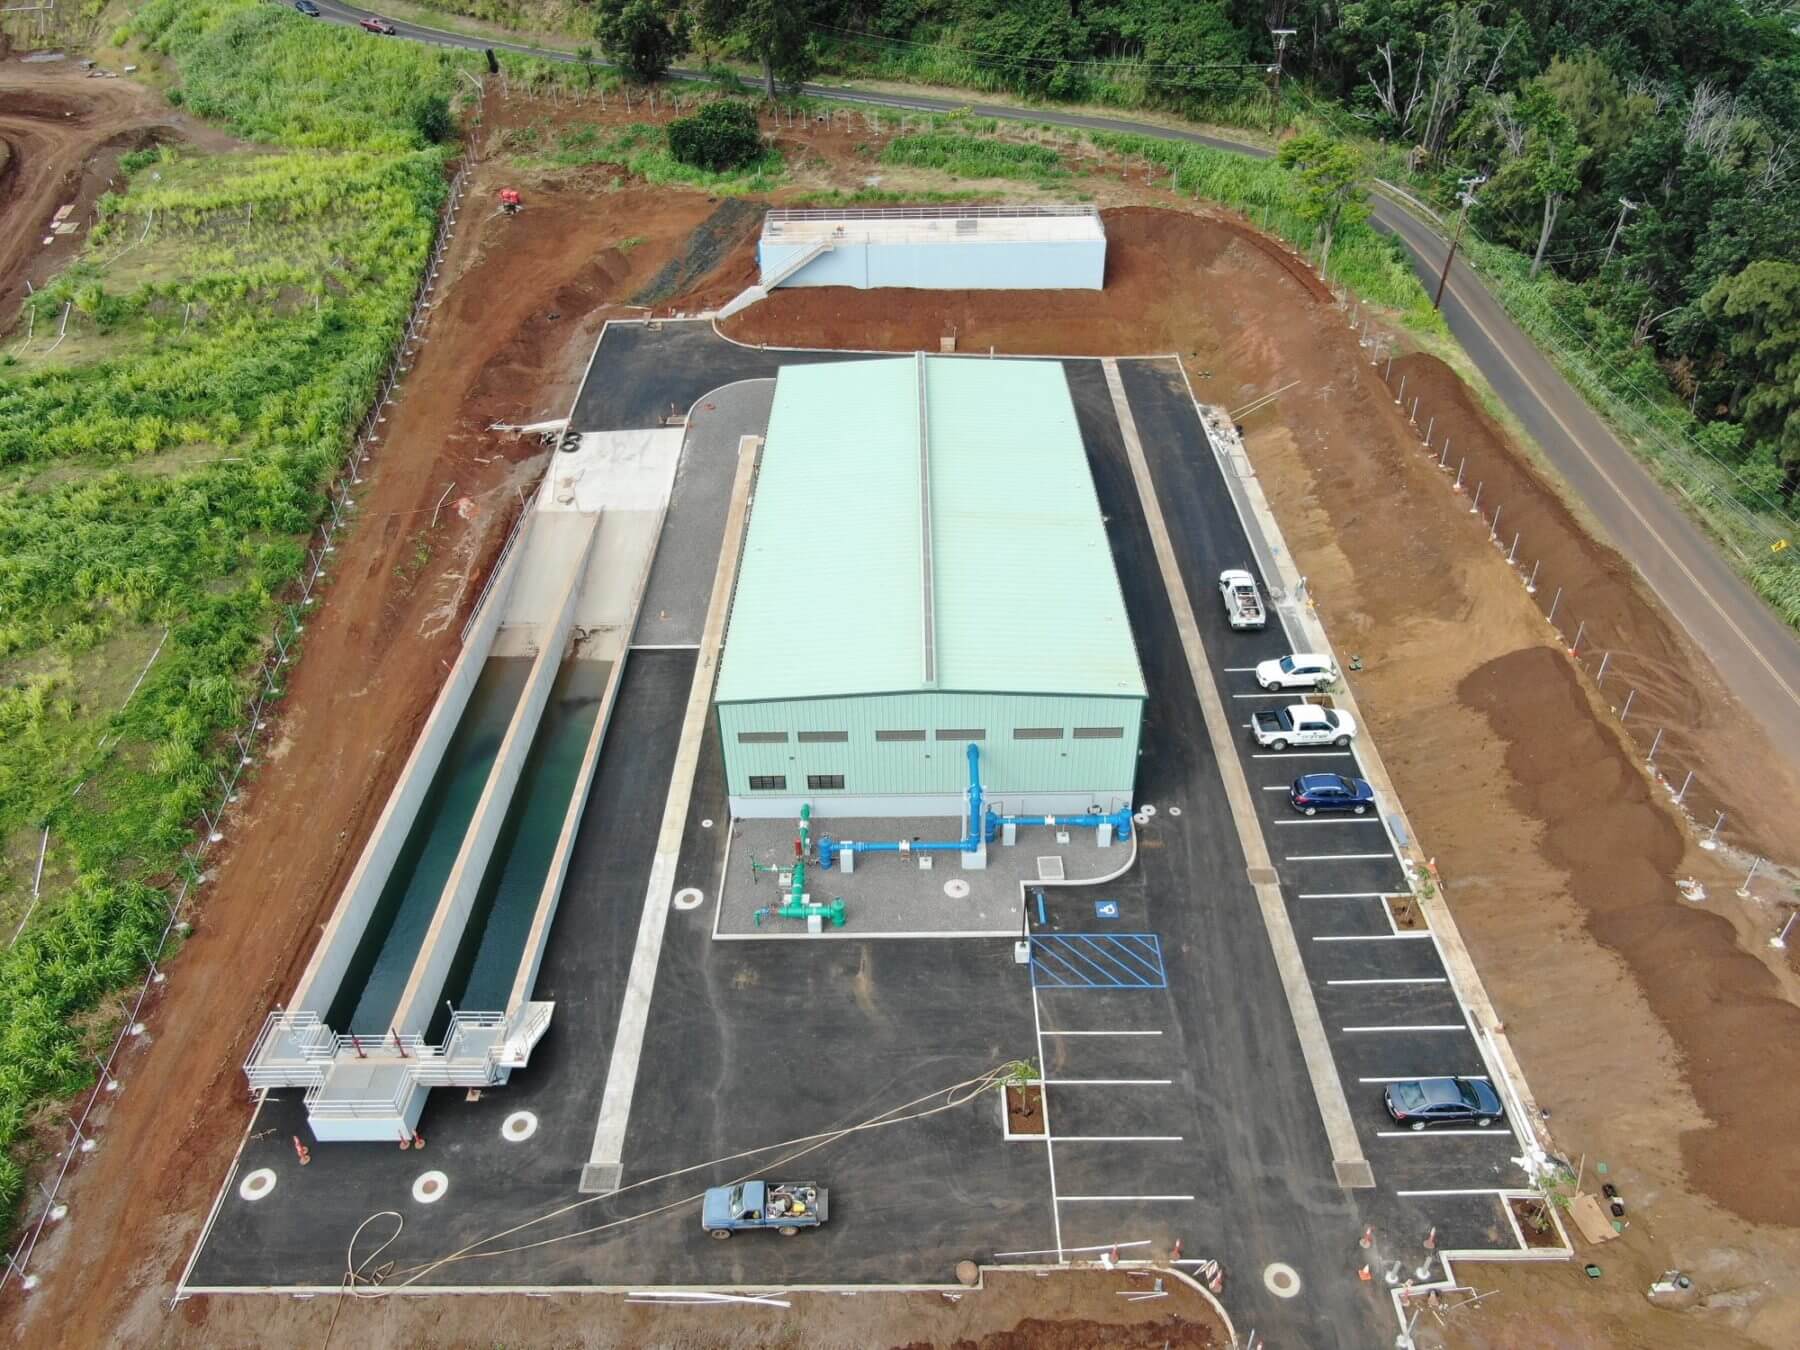 Iao Water Treatment Plant draws near to its completion.